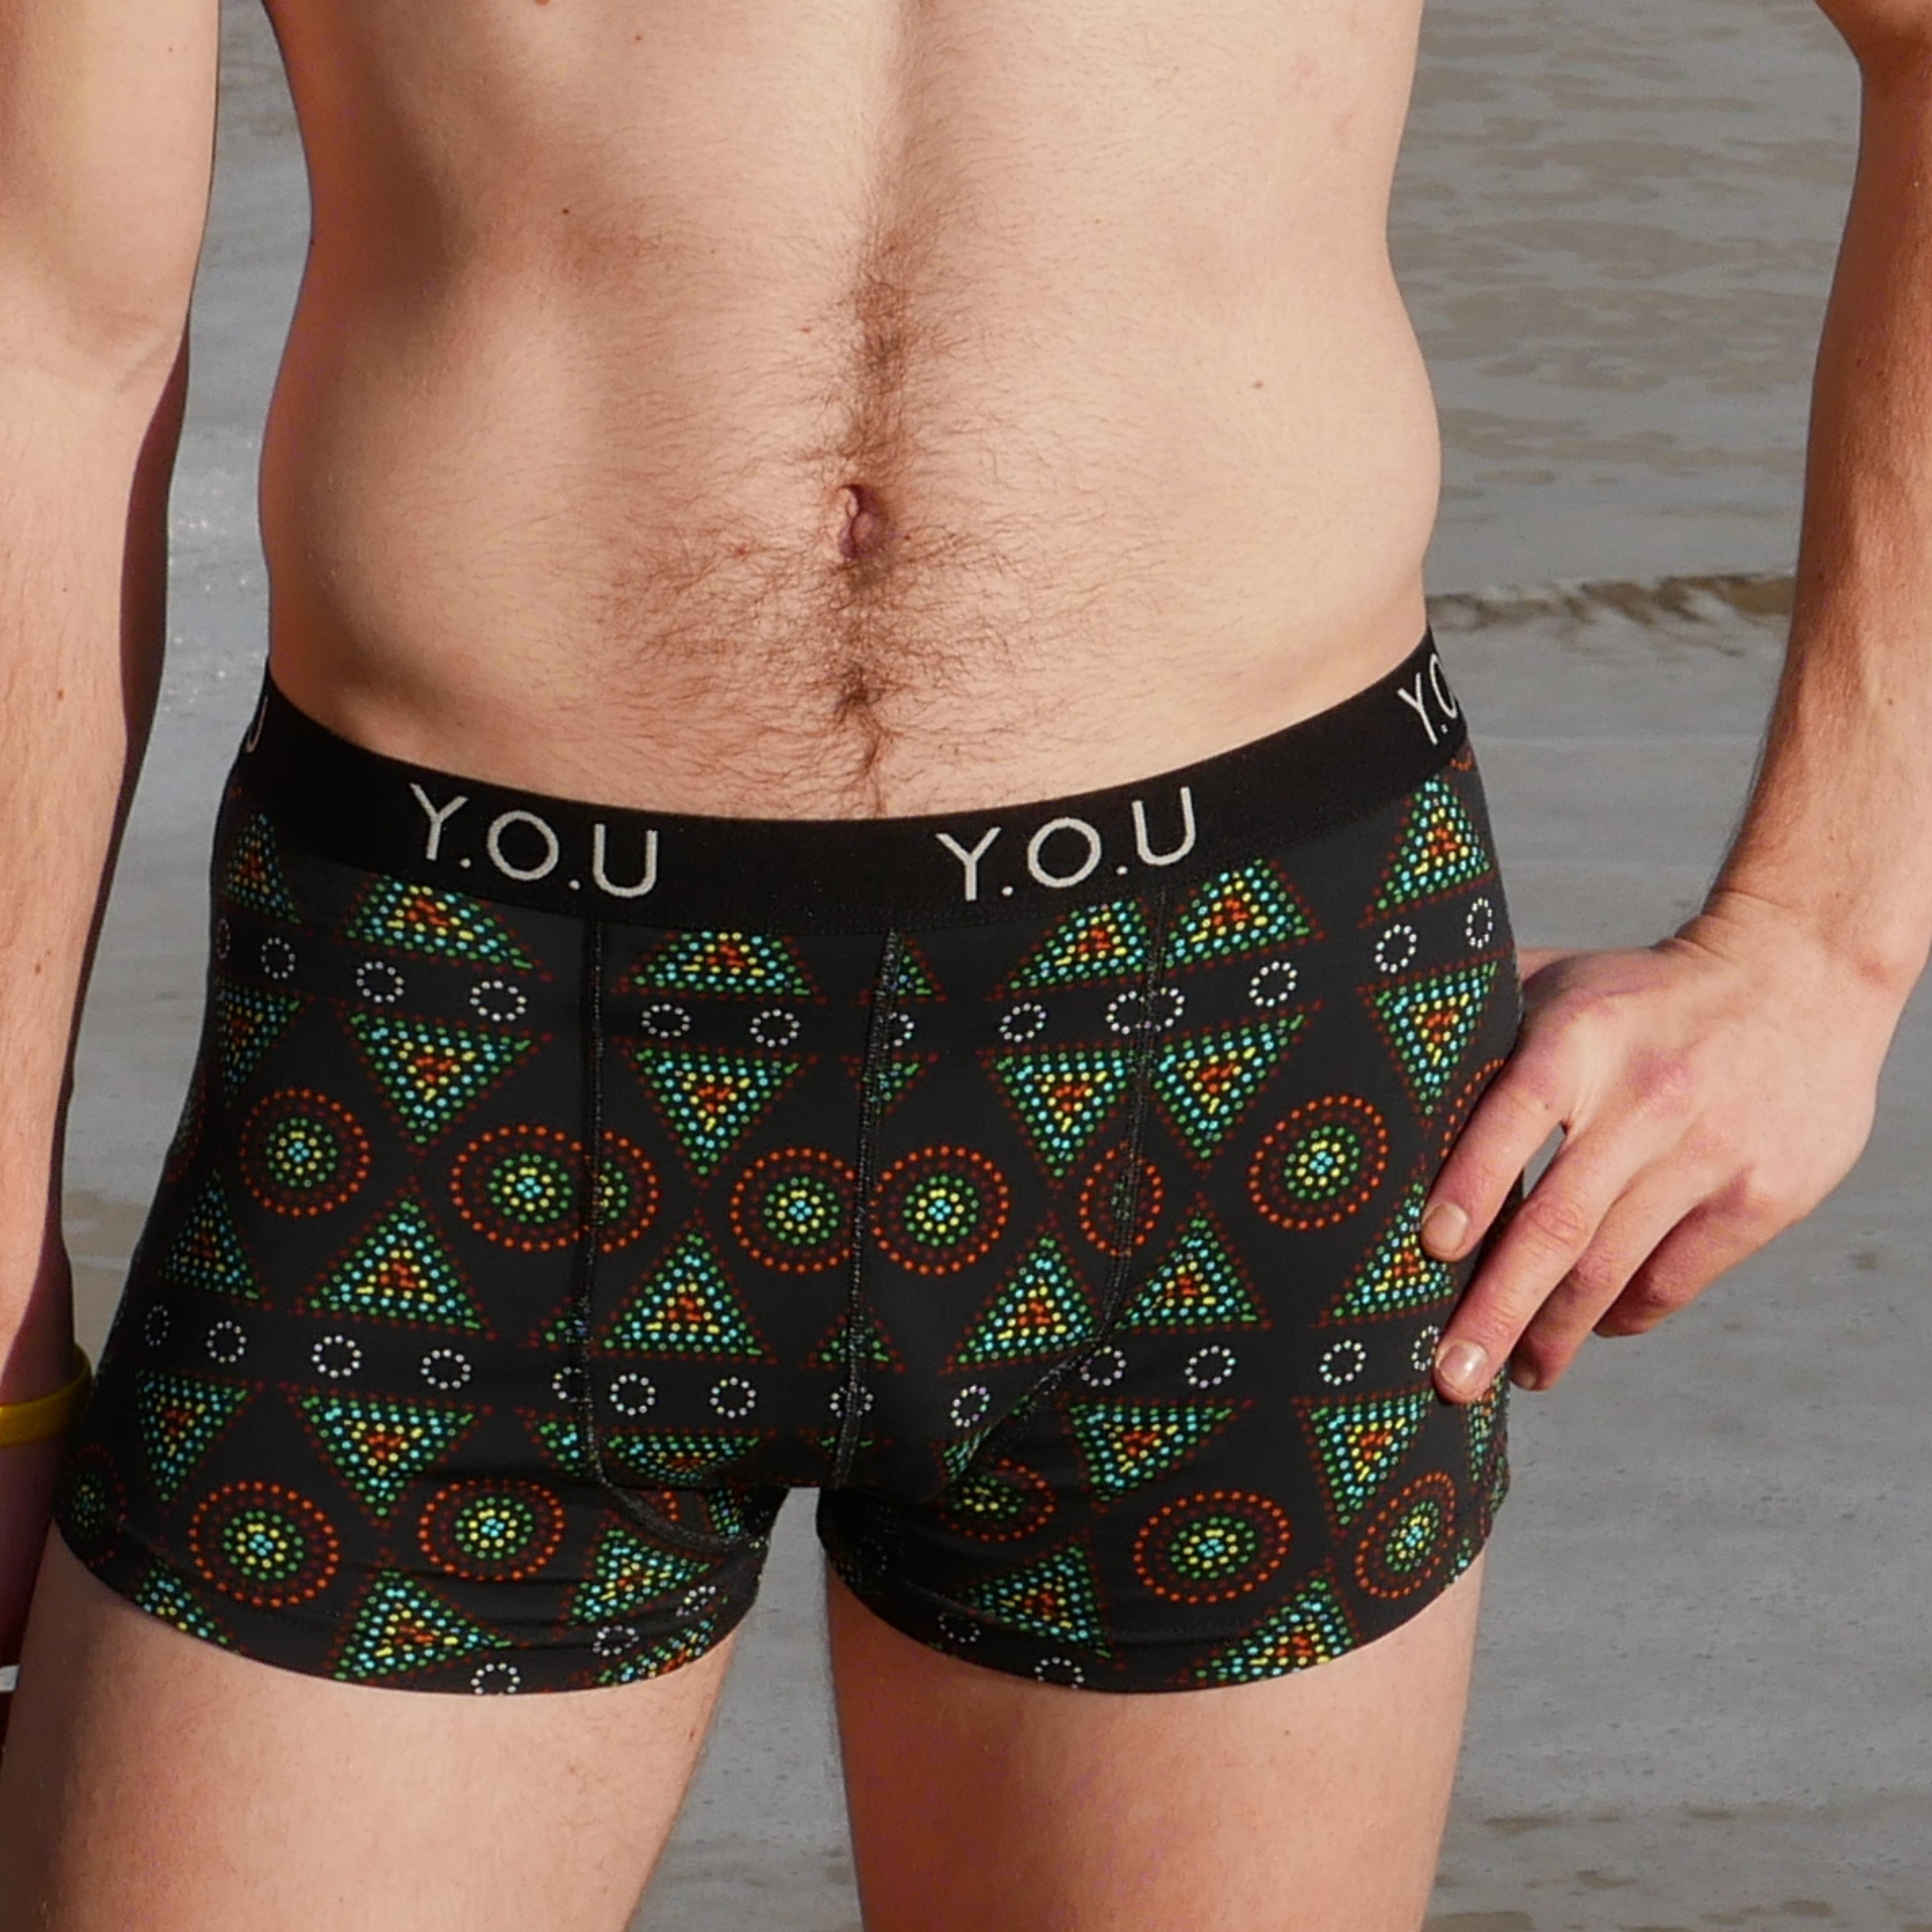 A person stands outdoors wearing black men's hipster trunks with geometric red, green, and orange patterns. The waistband reads "Y.O.U." in white letters. The person's left hand rests on their hip, and part of an arm is visible on their right side.